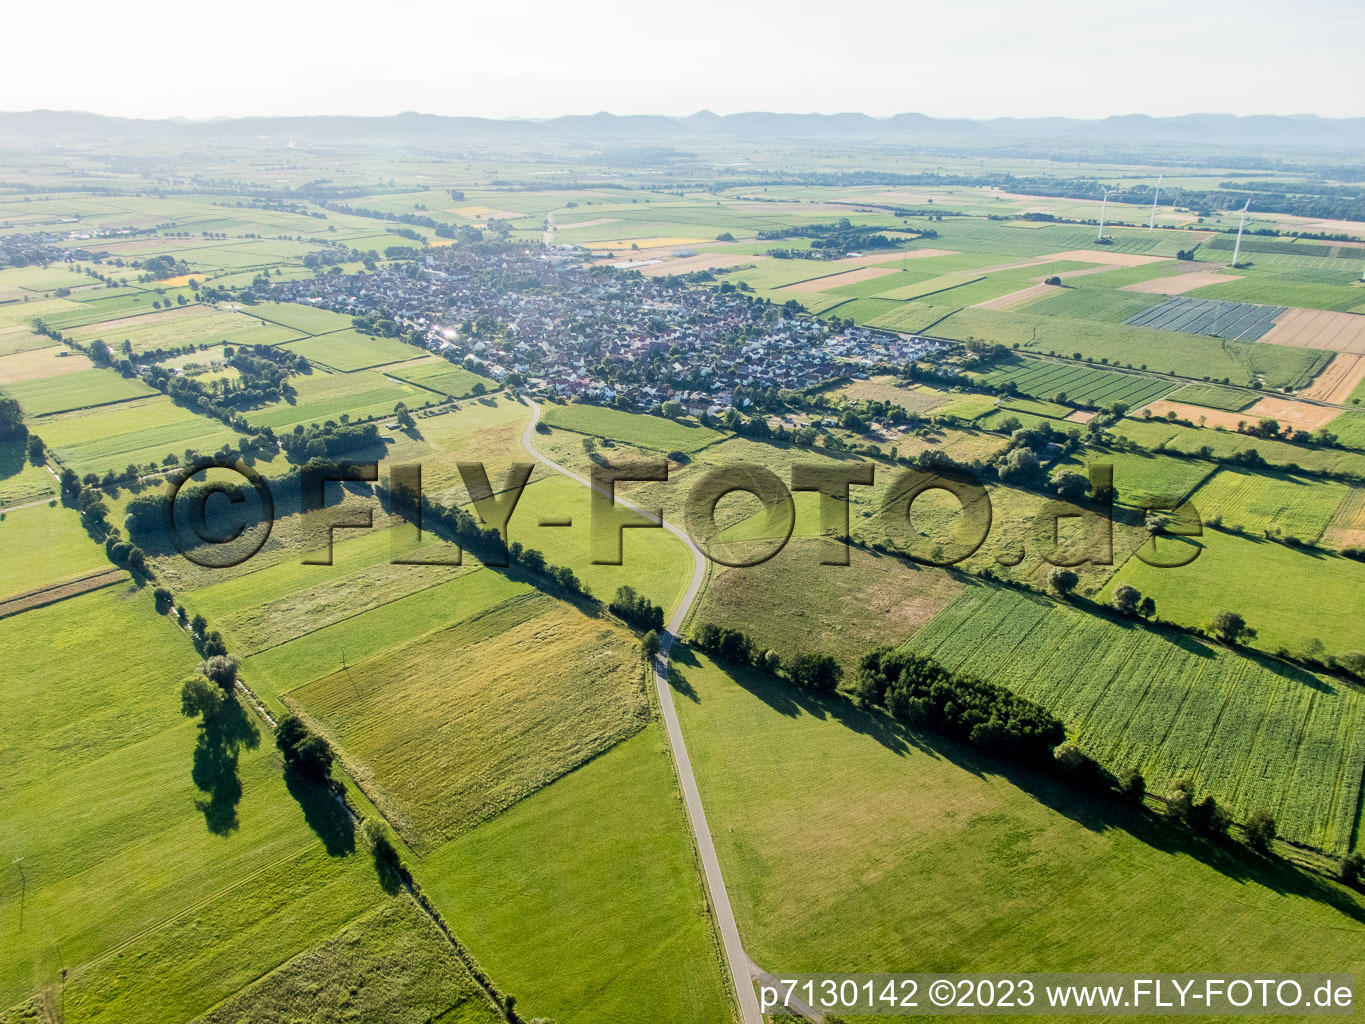 Drone recording of Minfeld in the state Rhineland-Palatinate, Germany